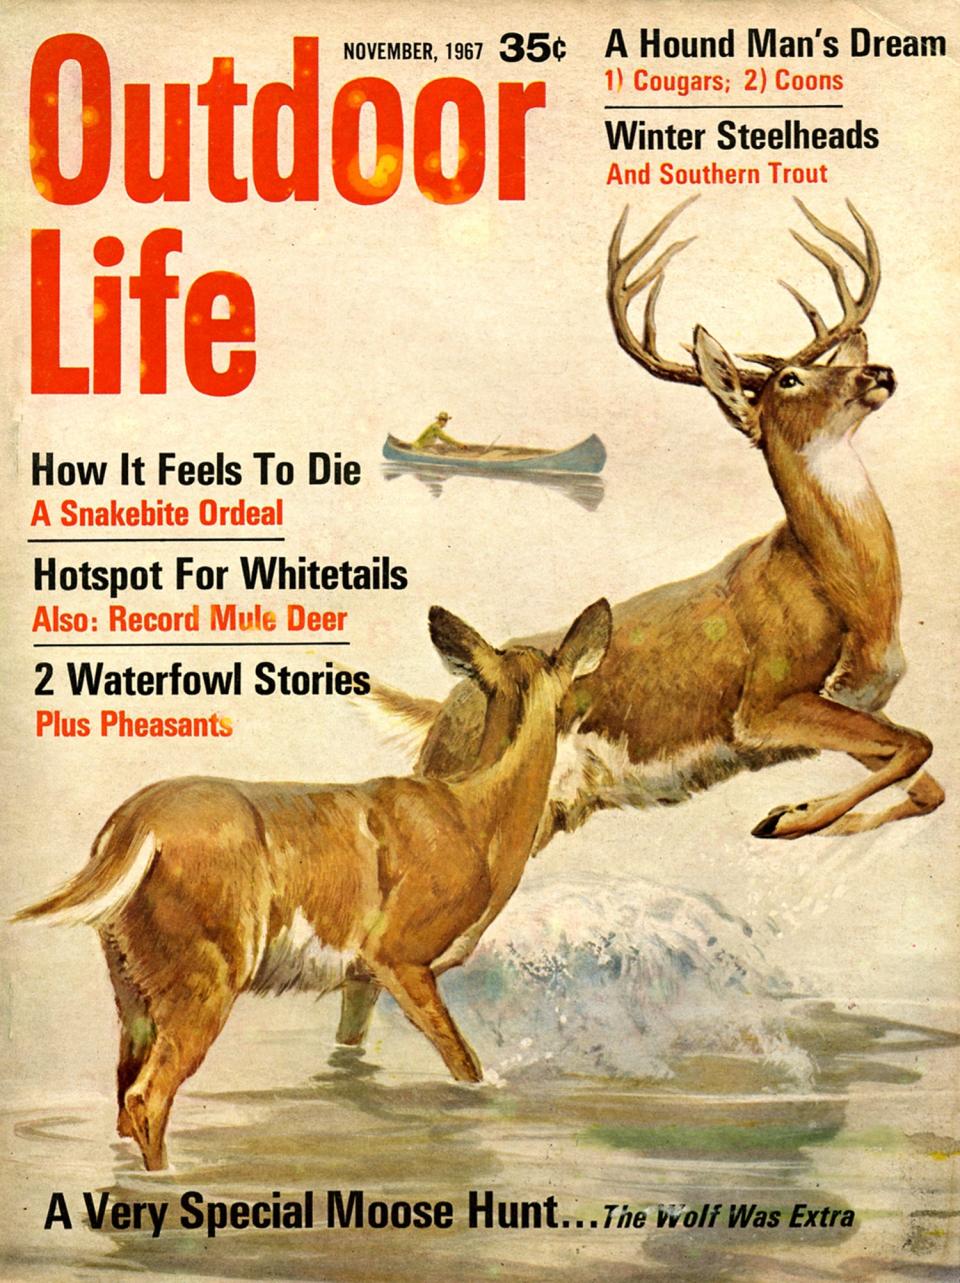 ­November 1967: If OL has an iconic cover scene, this is it: a trophy critter with a hunter in the background.